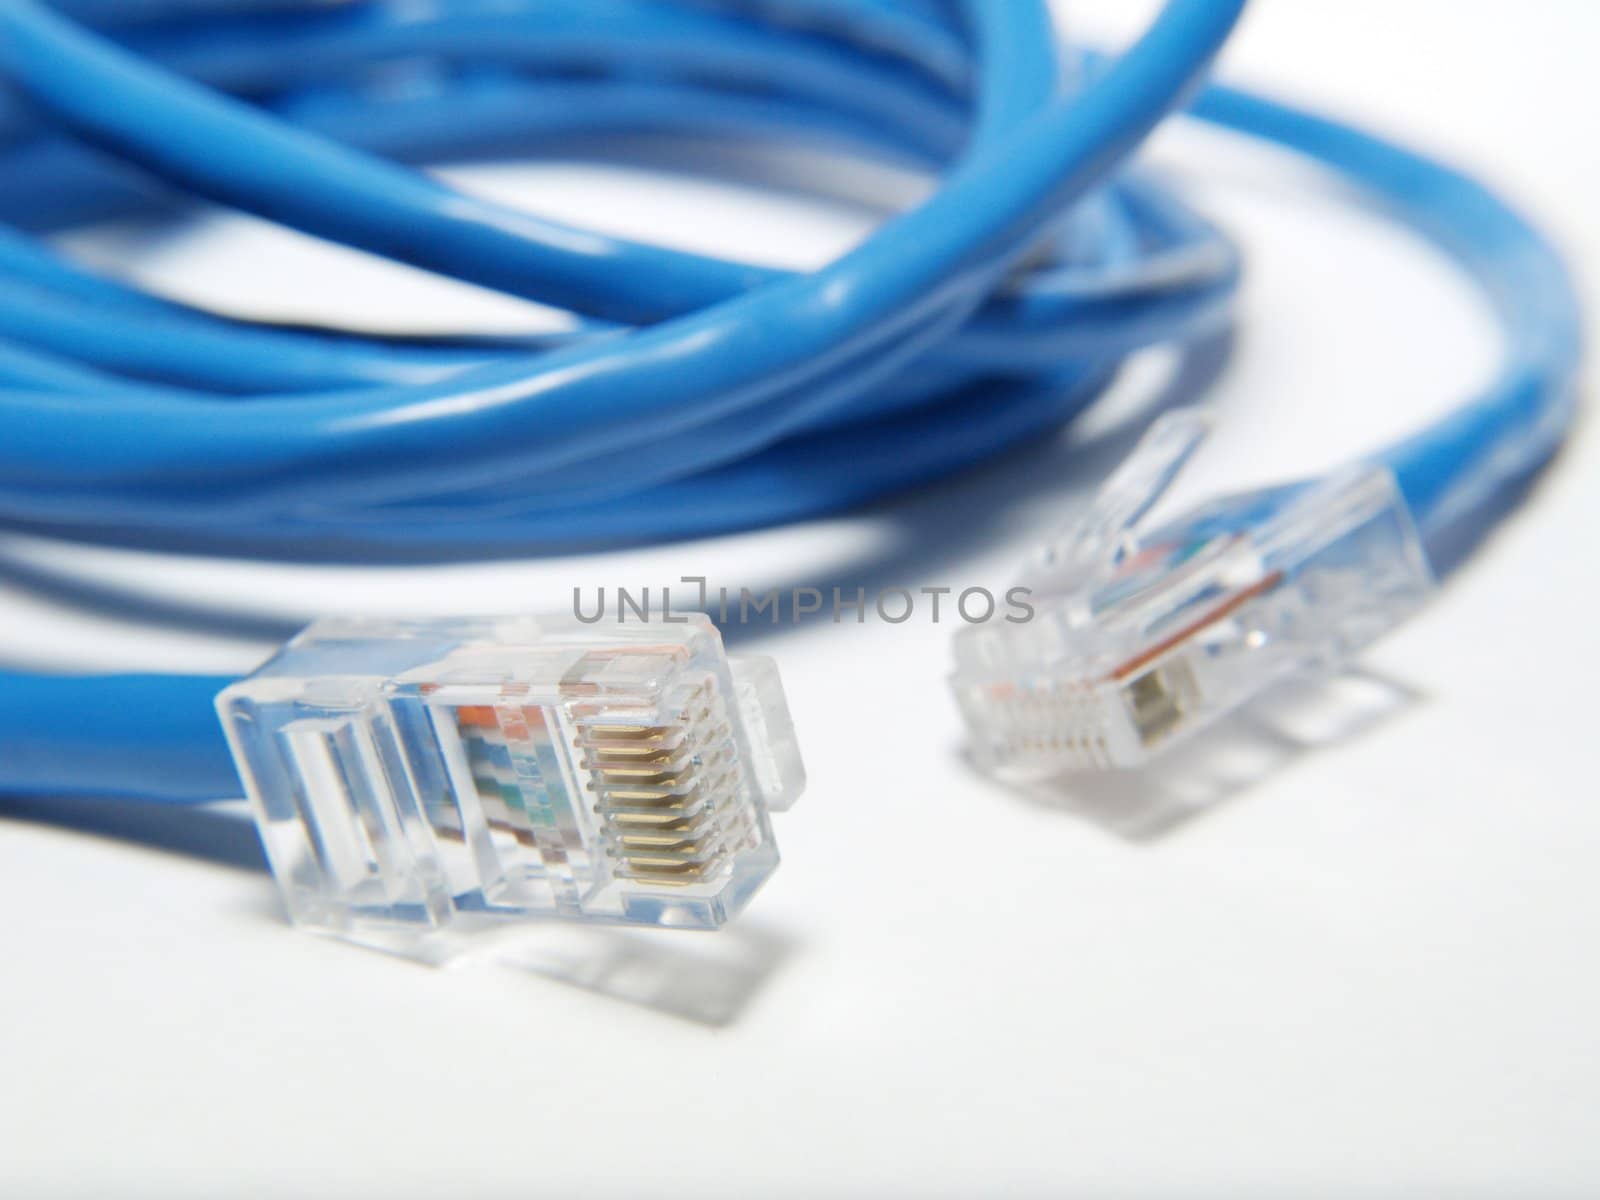 Utp cable for internet